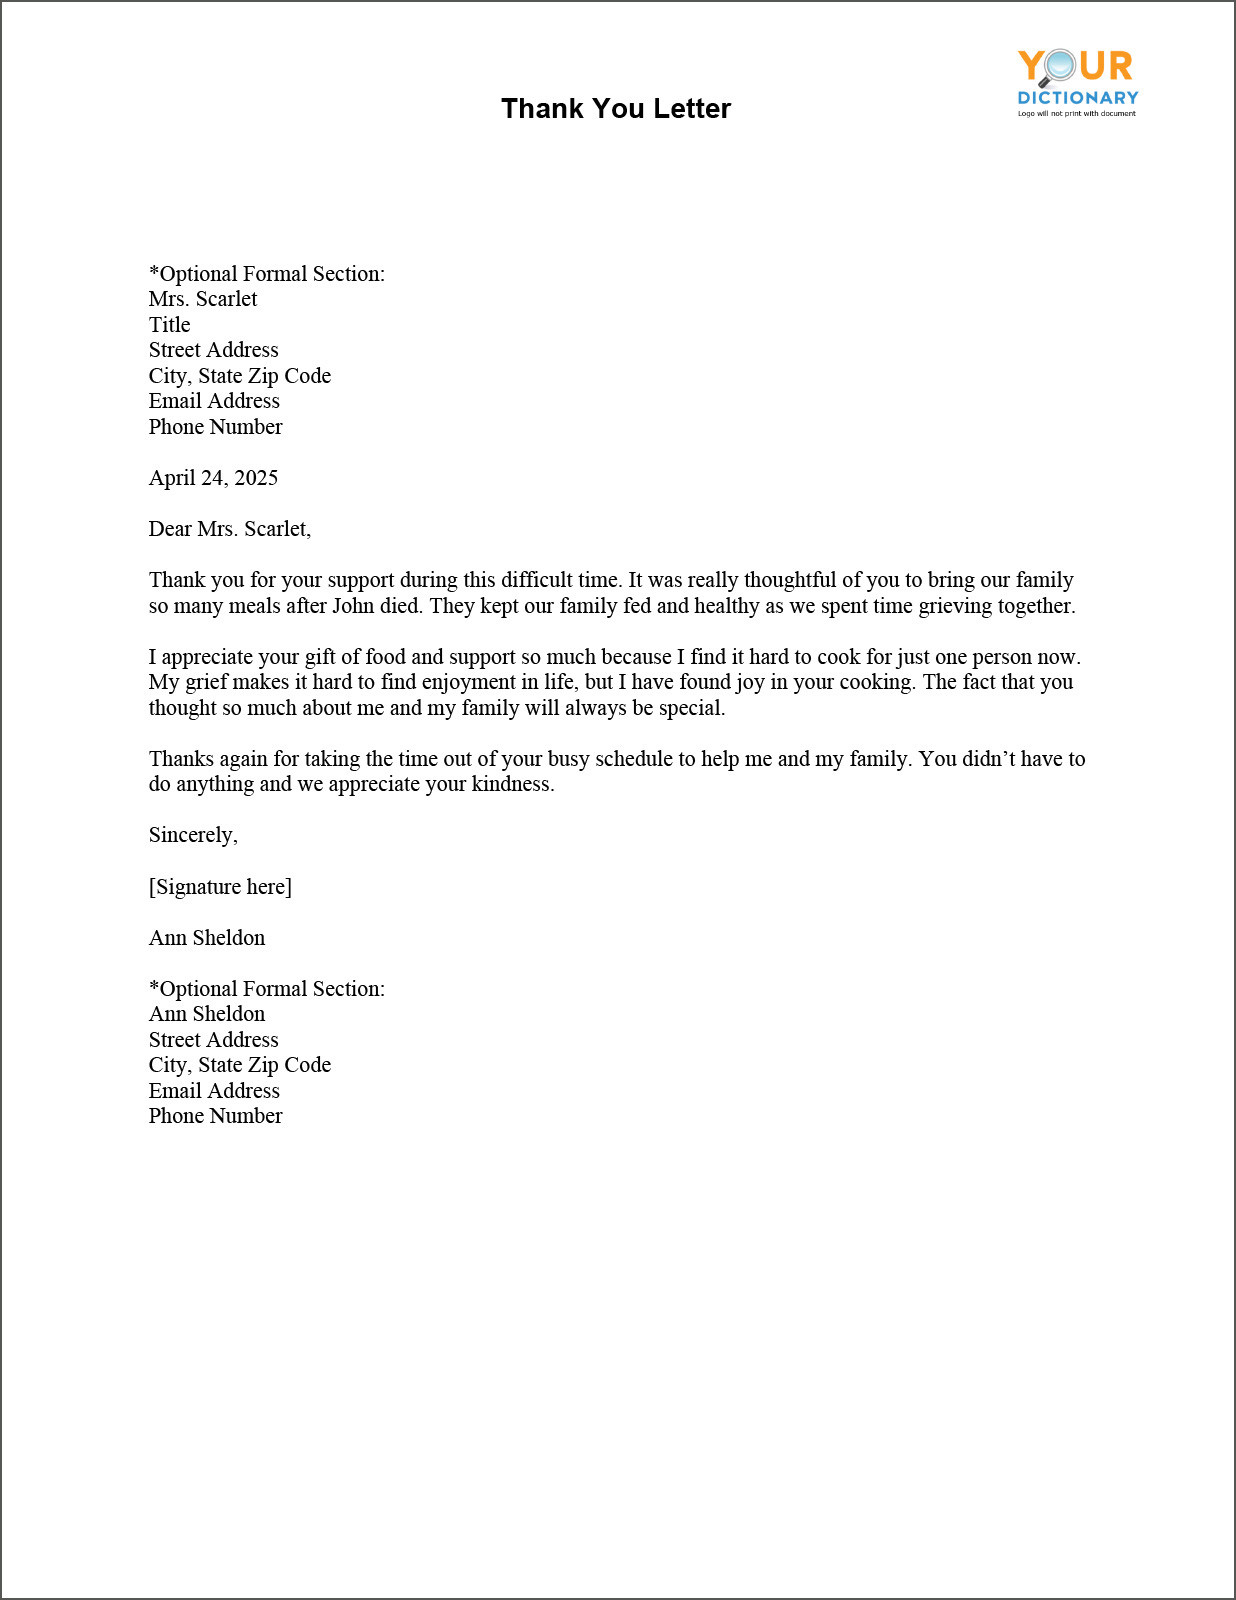 view-thank-you-letter-template-gif-resume-template-sxty